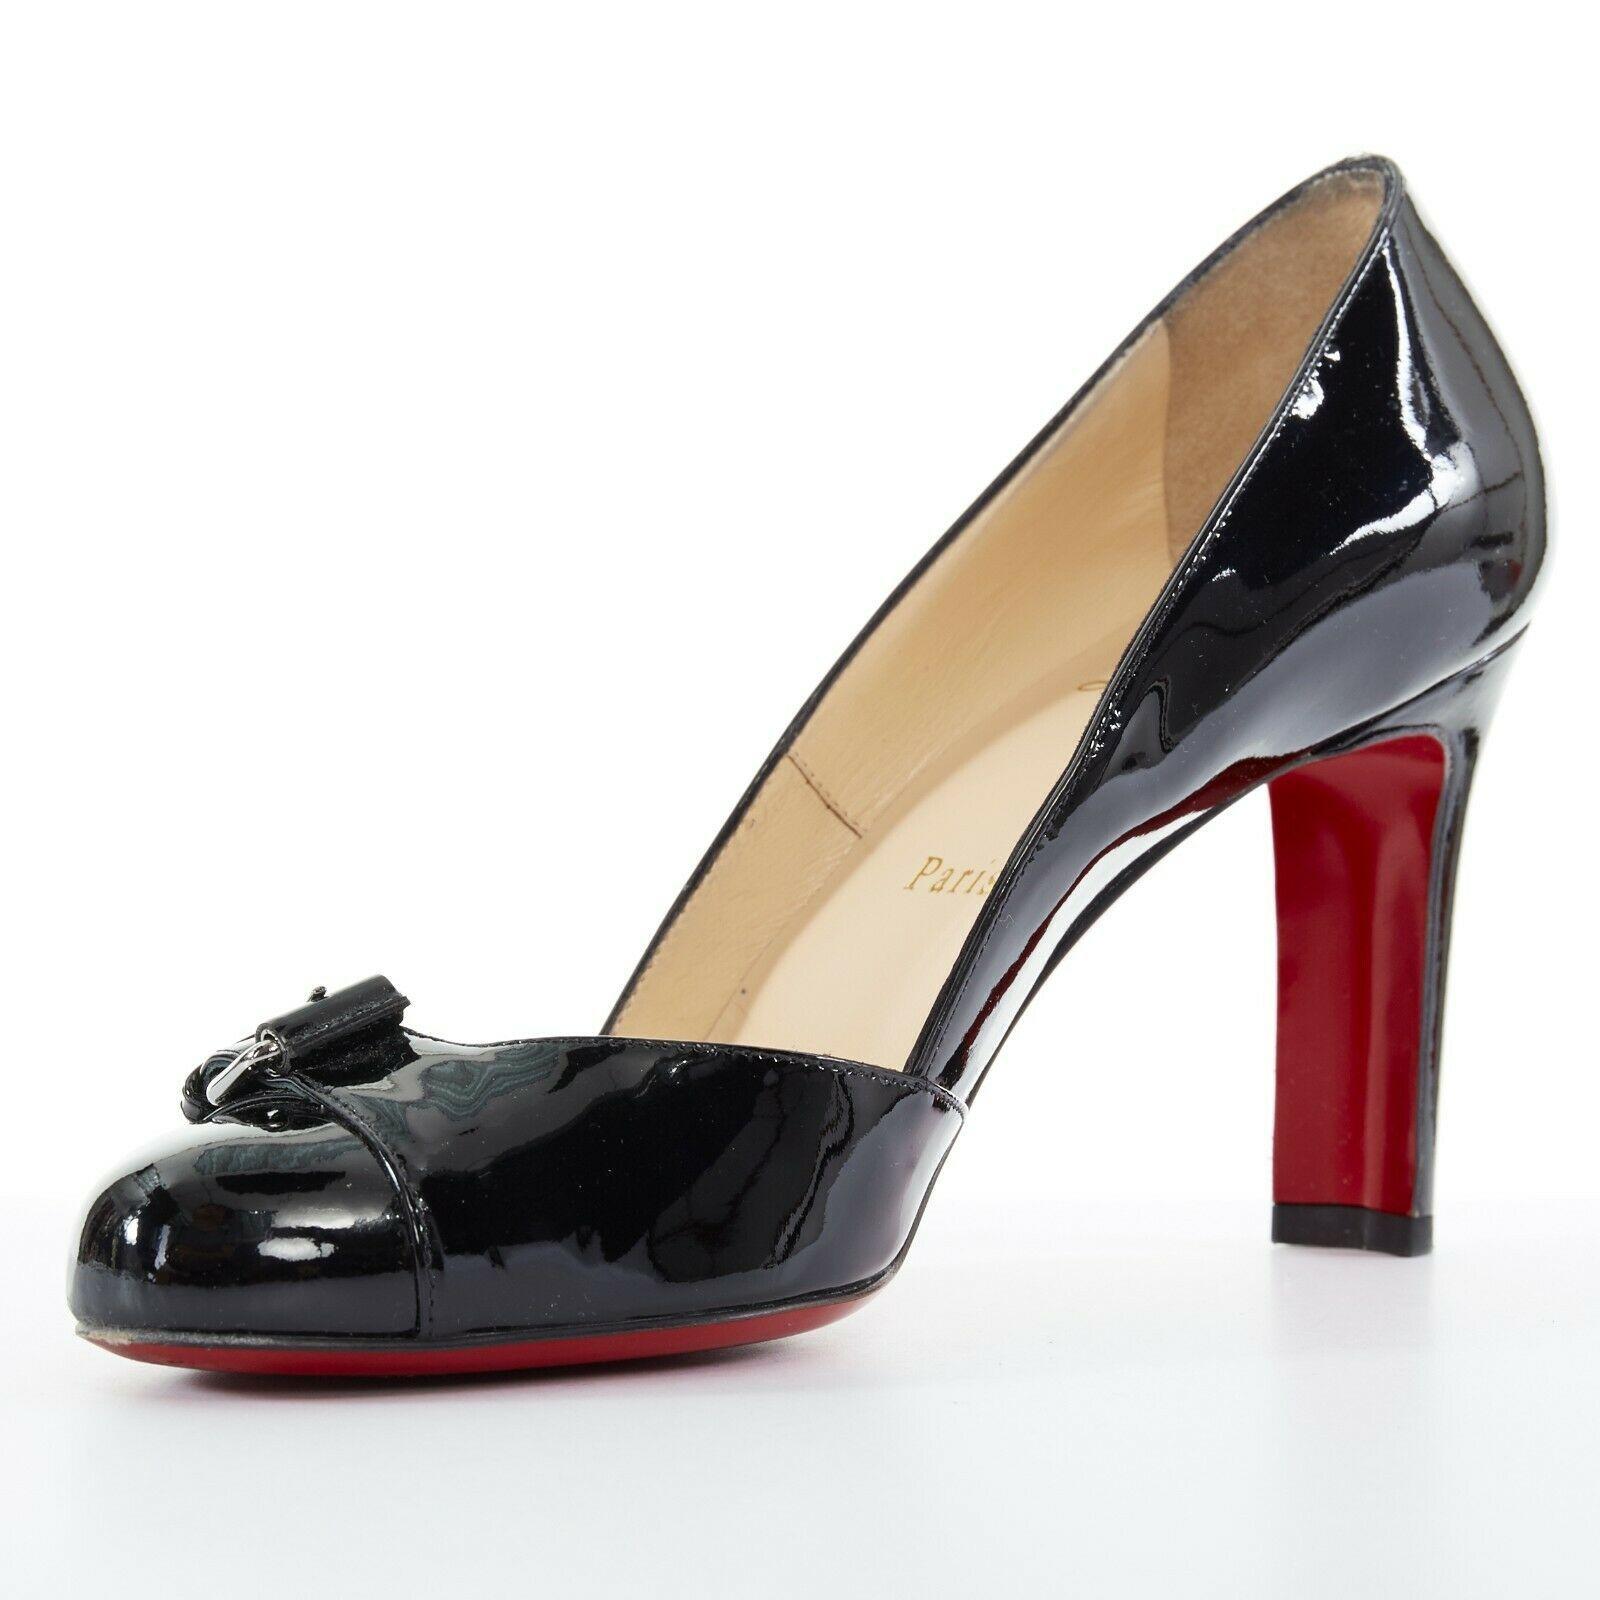 christian louboutin serial number